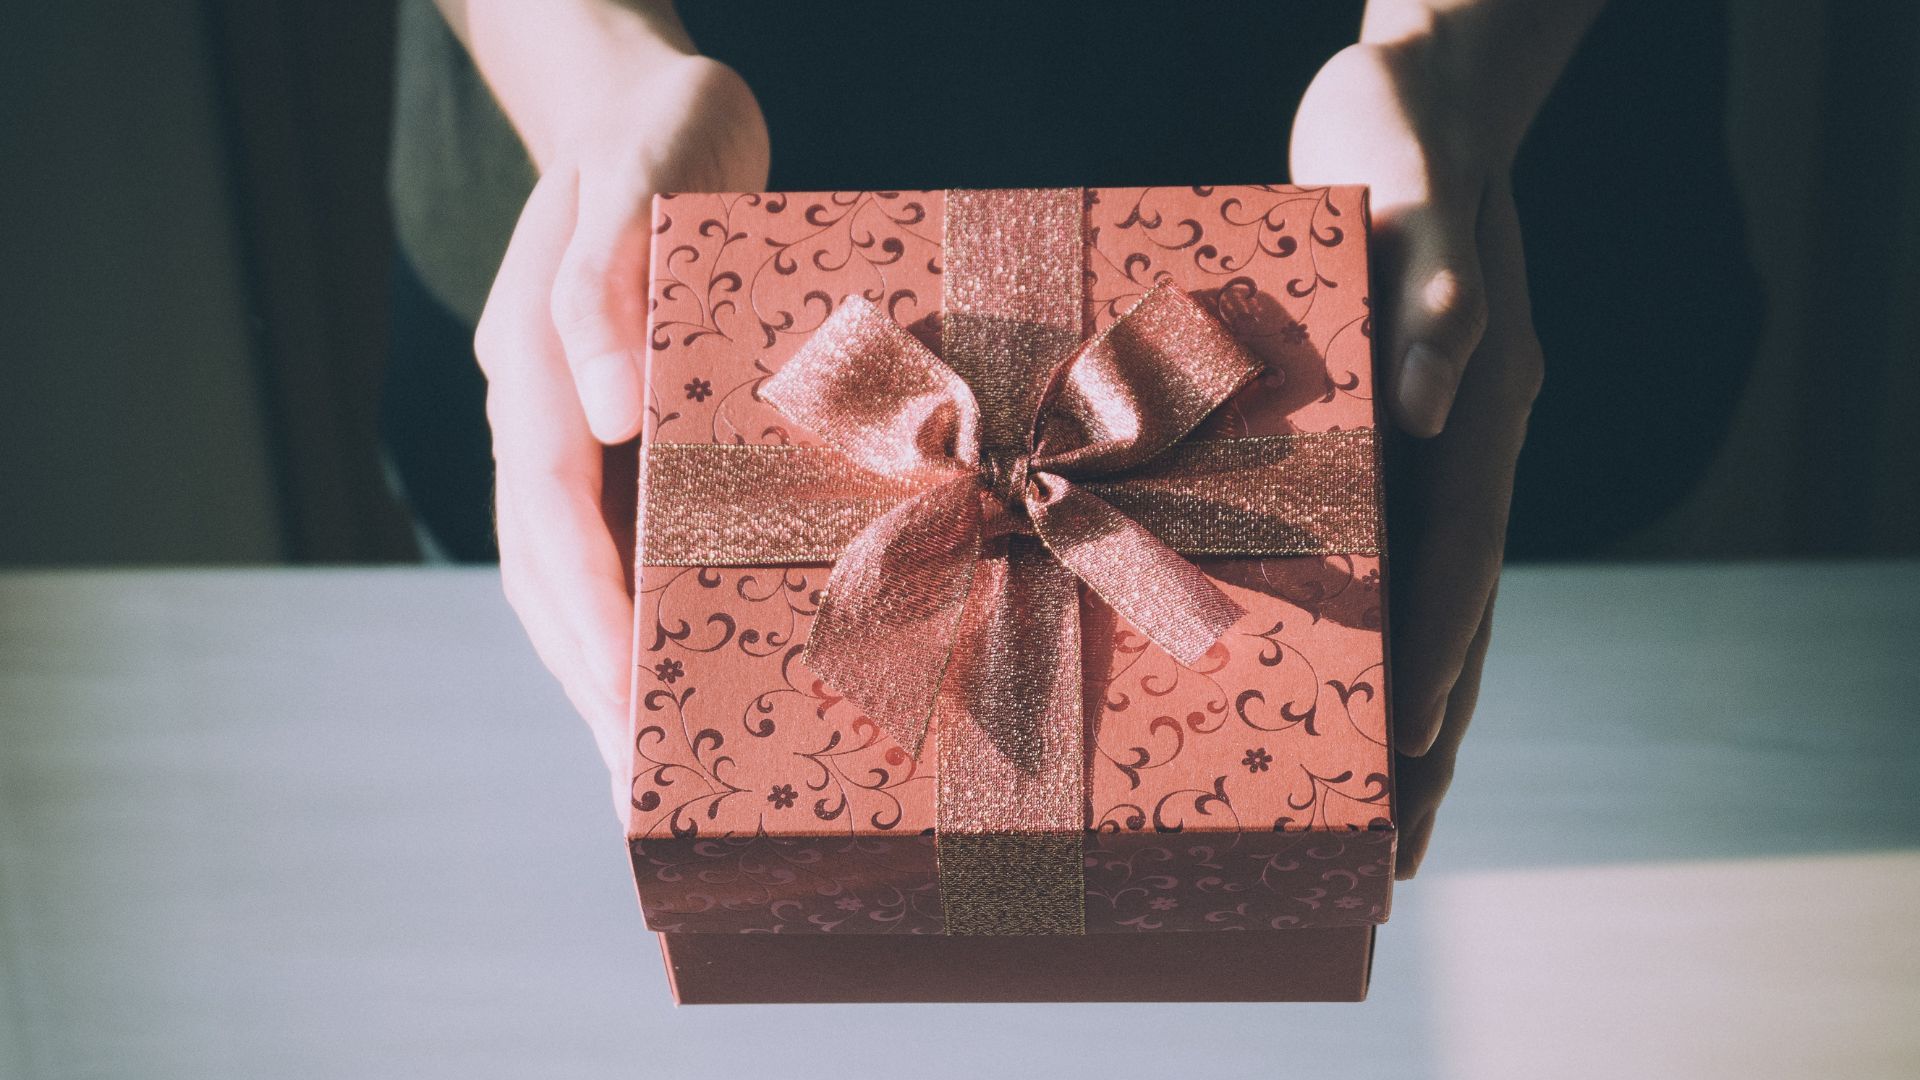 30 Most Unique Gifts for Your Boyfriend » All Gifts Considered